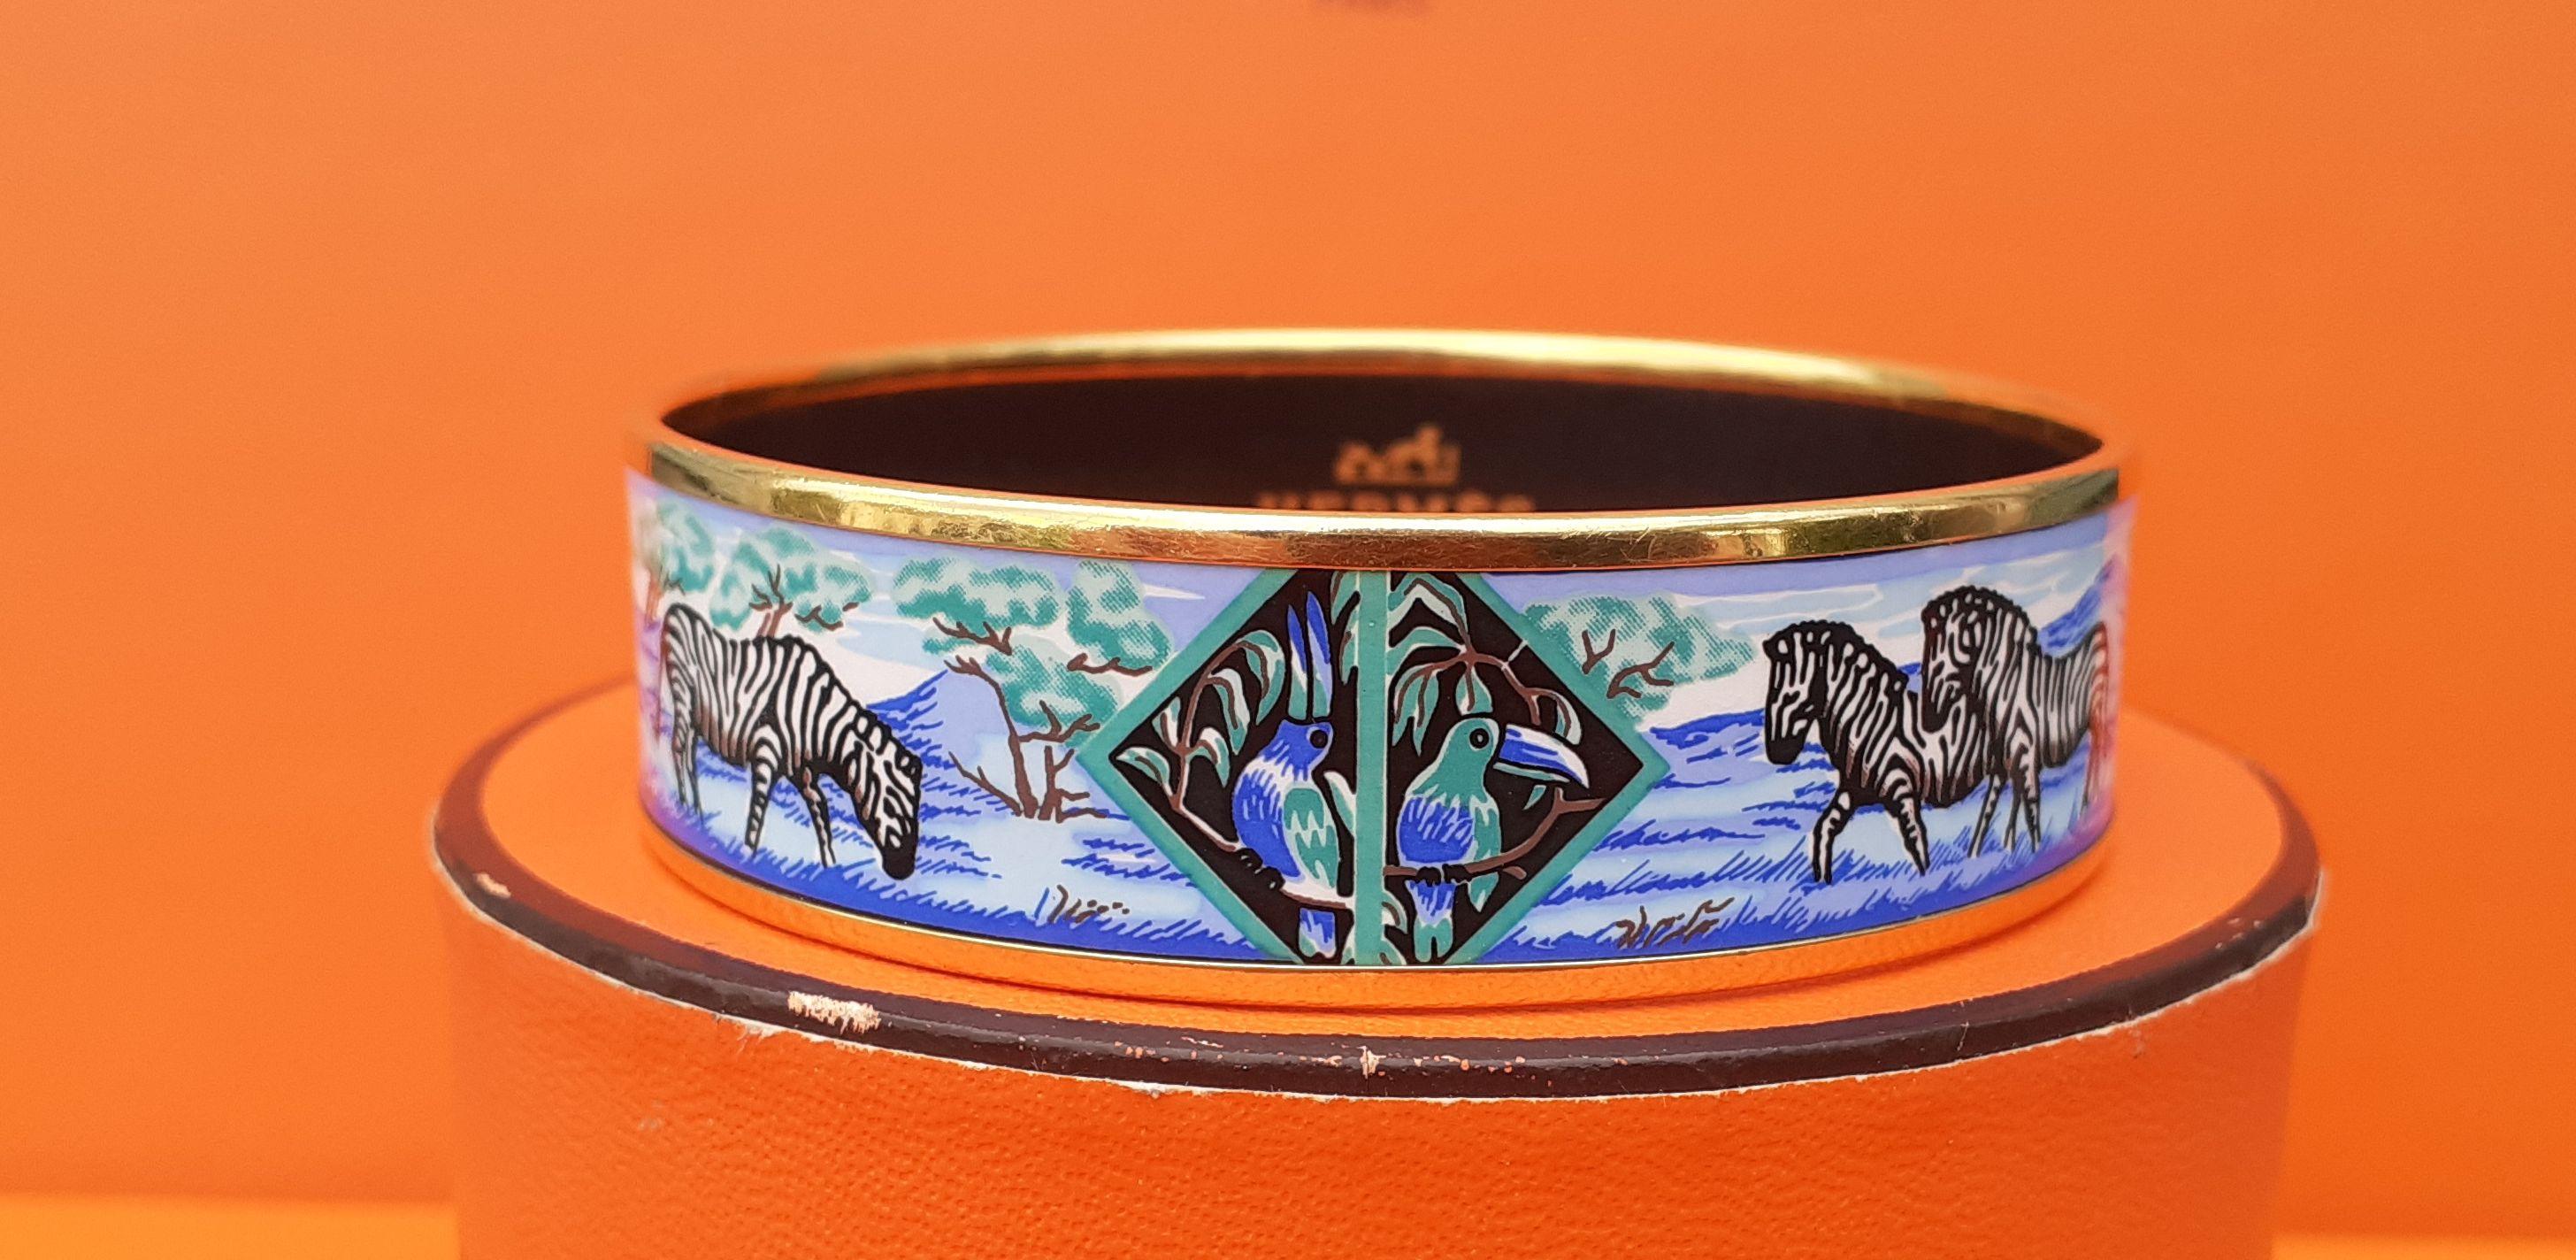 Super Rare and Beautiful Authentic Hermès Bracelet

Pattern: Zebras and Toucans

From the scarf called 